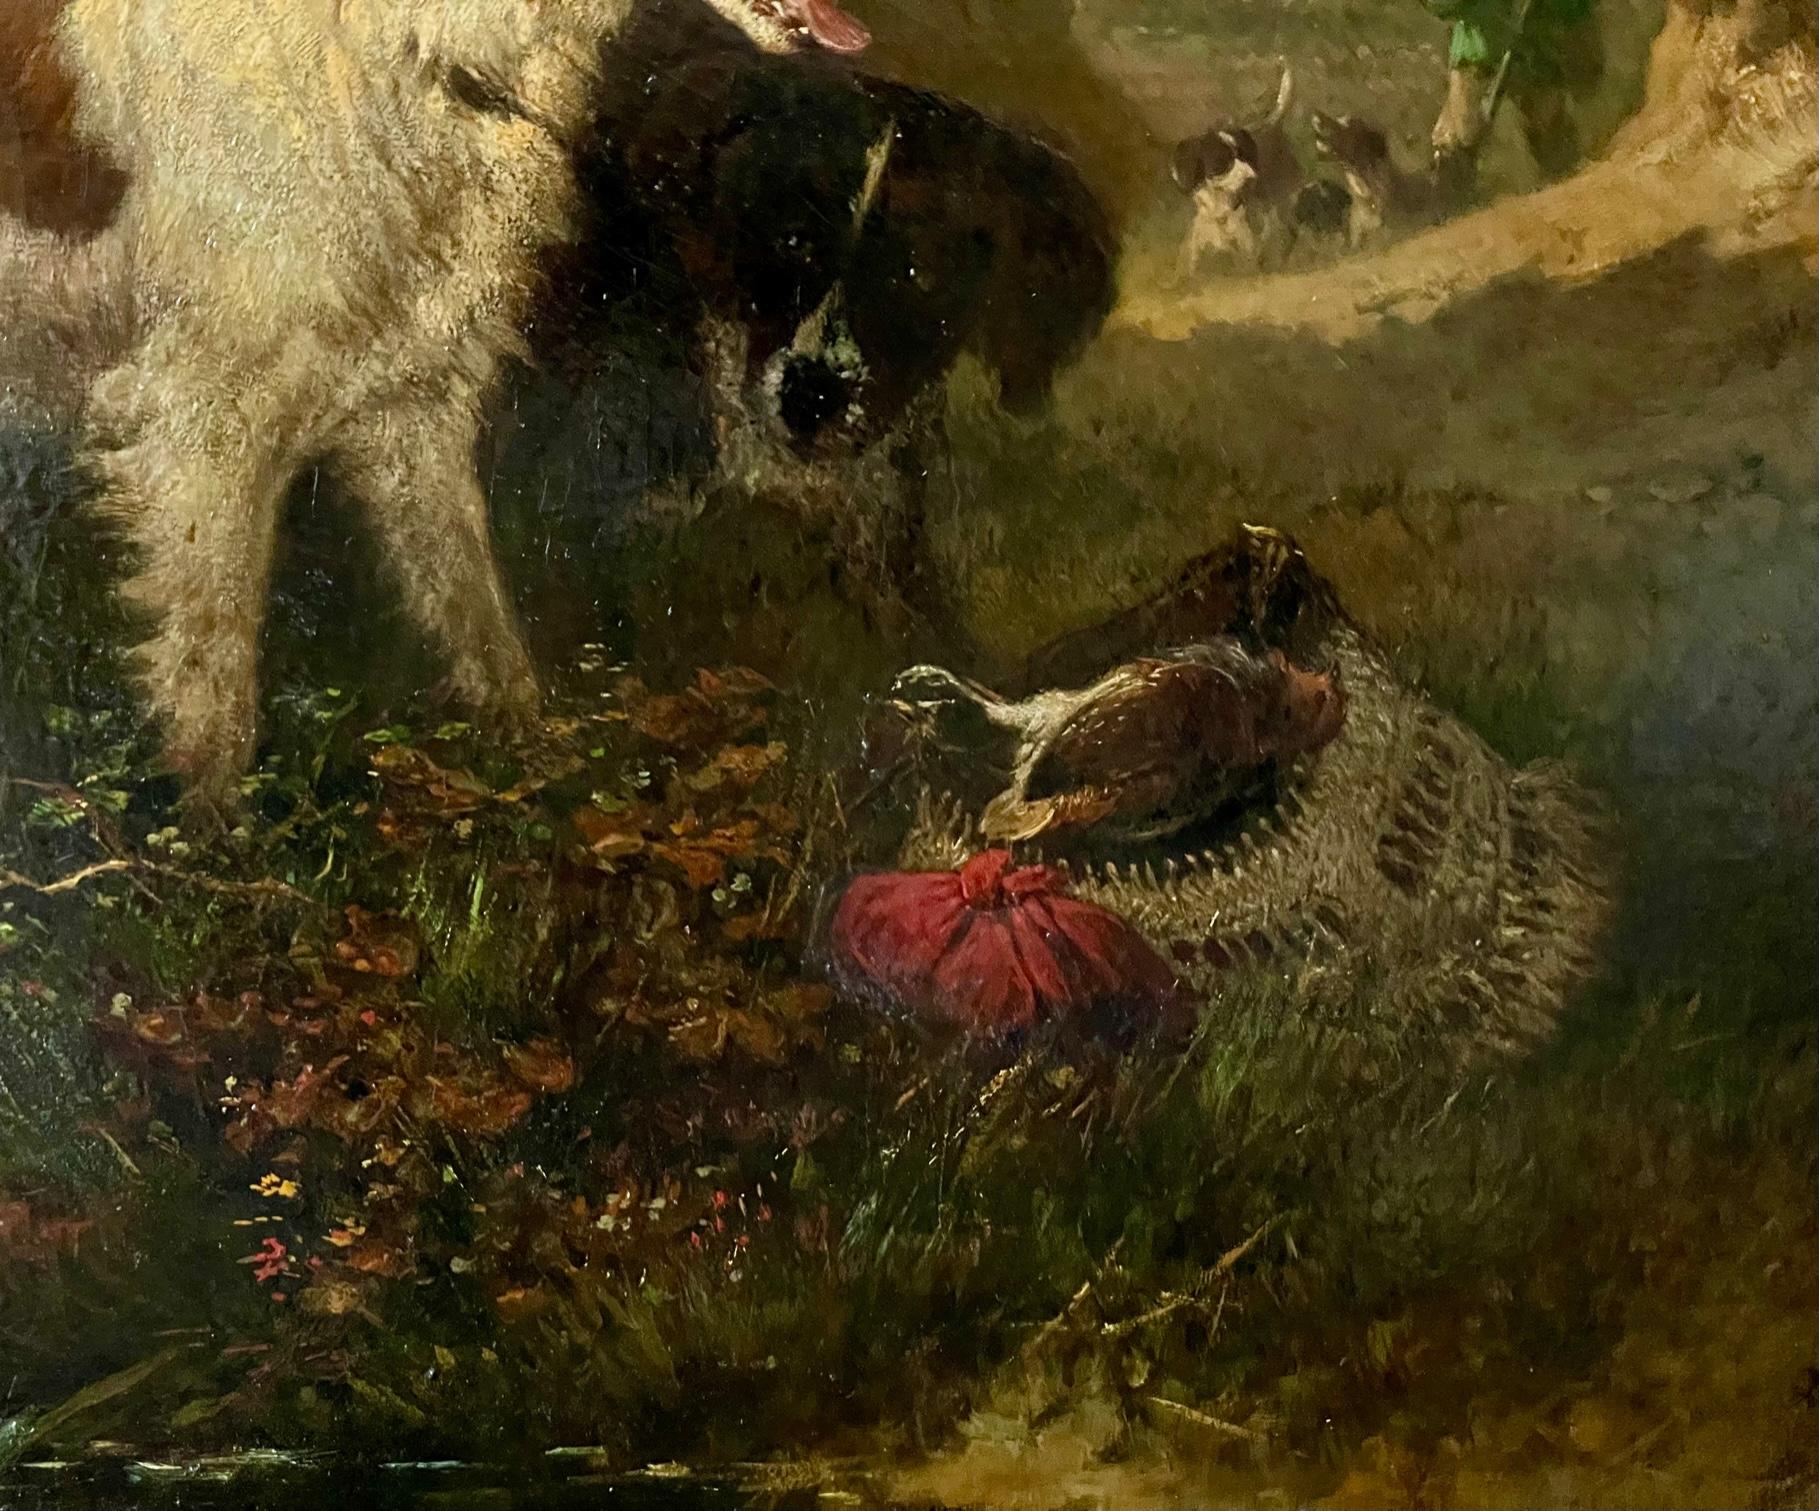 'After the Hunt' is a 19th century painting by Henriette Ronner-Knip (1821-1909) Dutch/Belgian artist known for fine paintings of cats and dogs.  This larger than usual scene expands her genre with landscape, red satchel and a figure with dogs in